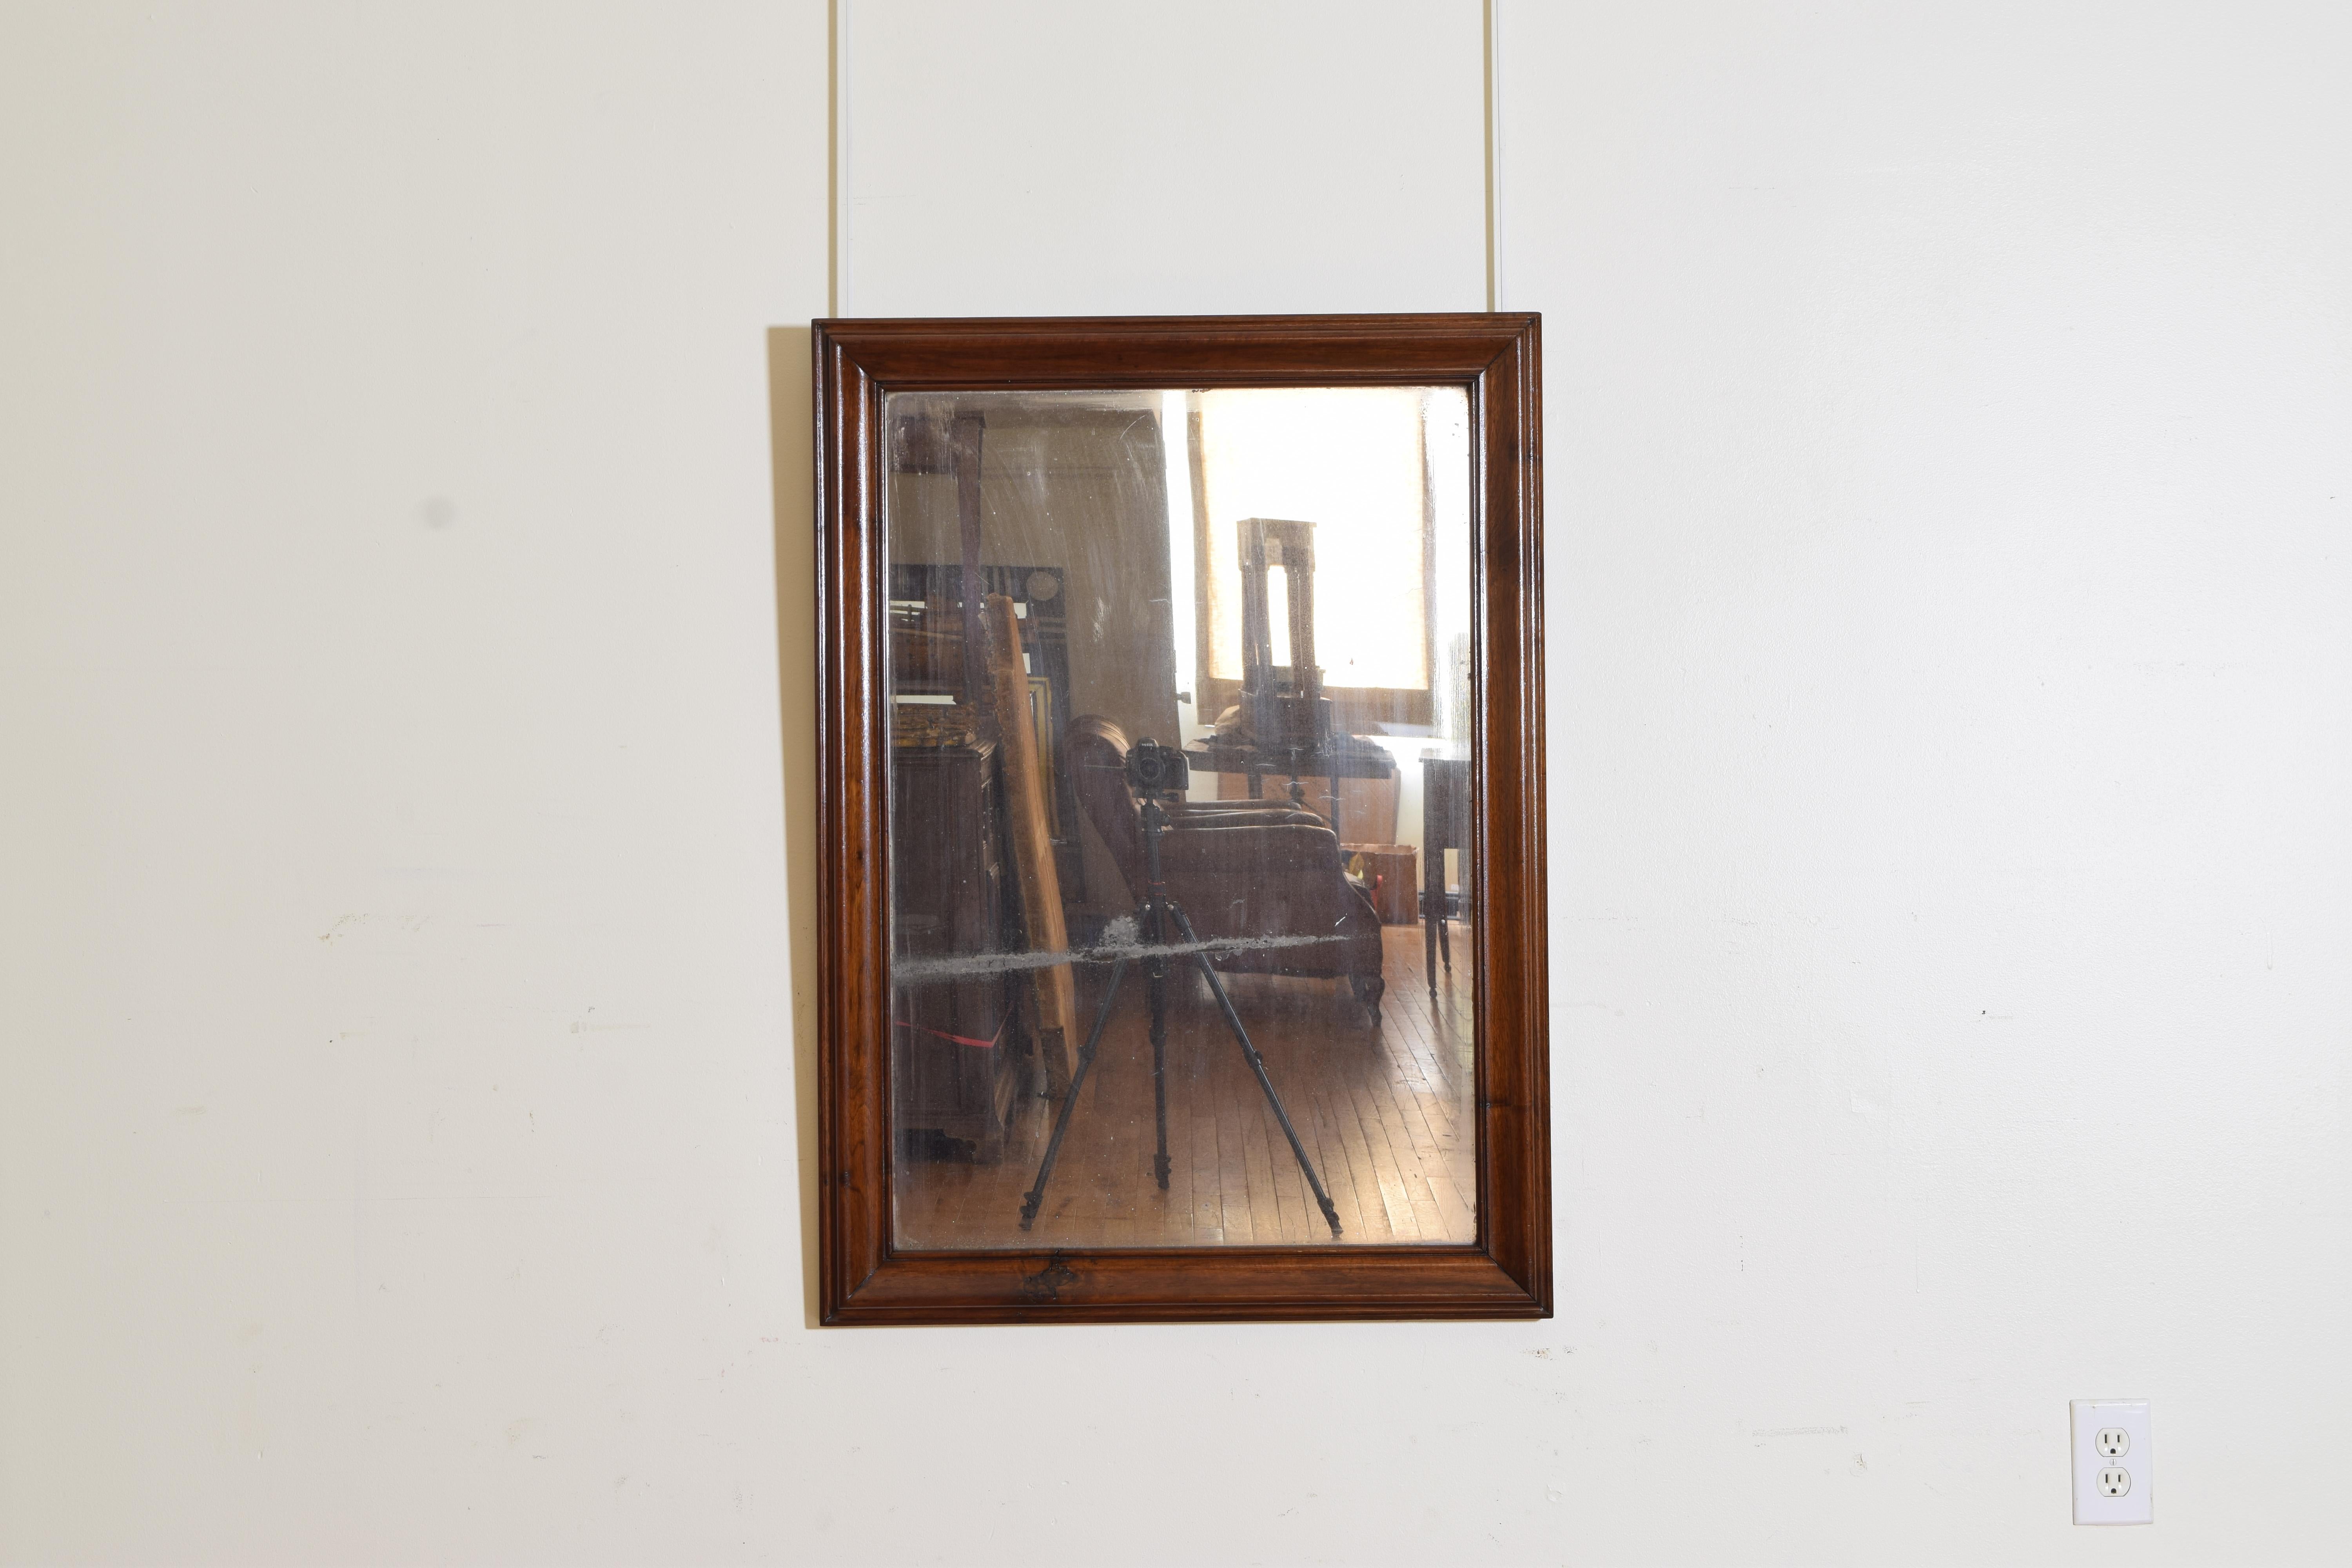 Constructed entirely of solId walnut this mirror has several different moldings within the frame and retains its original glass.